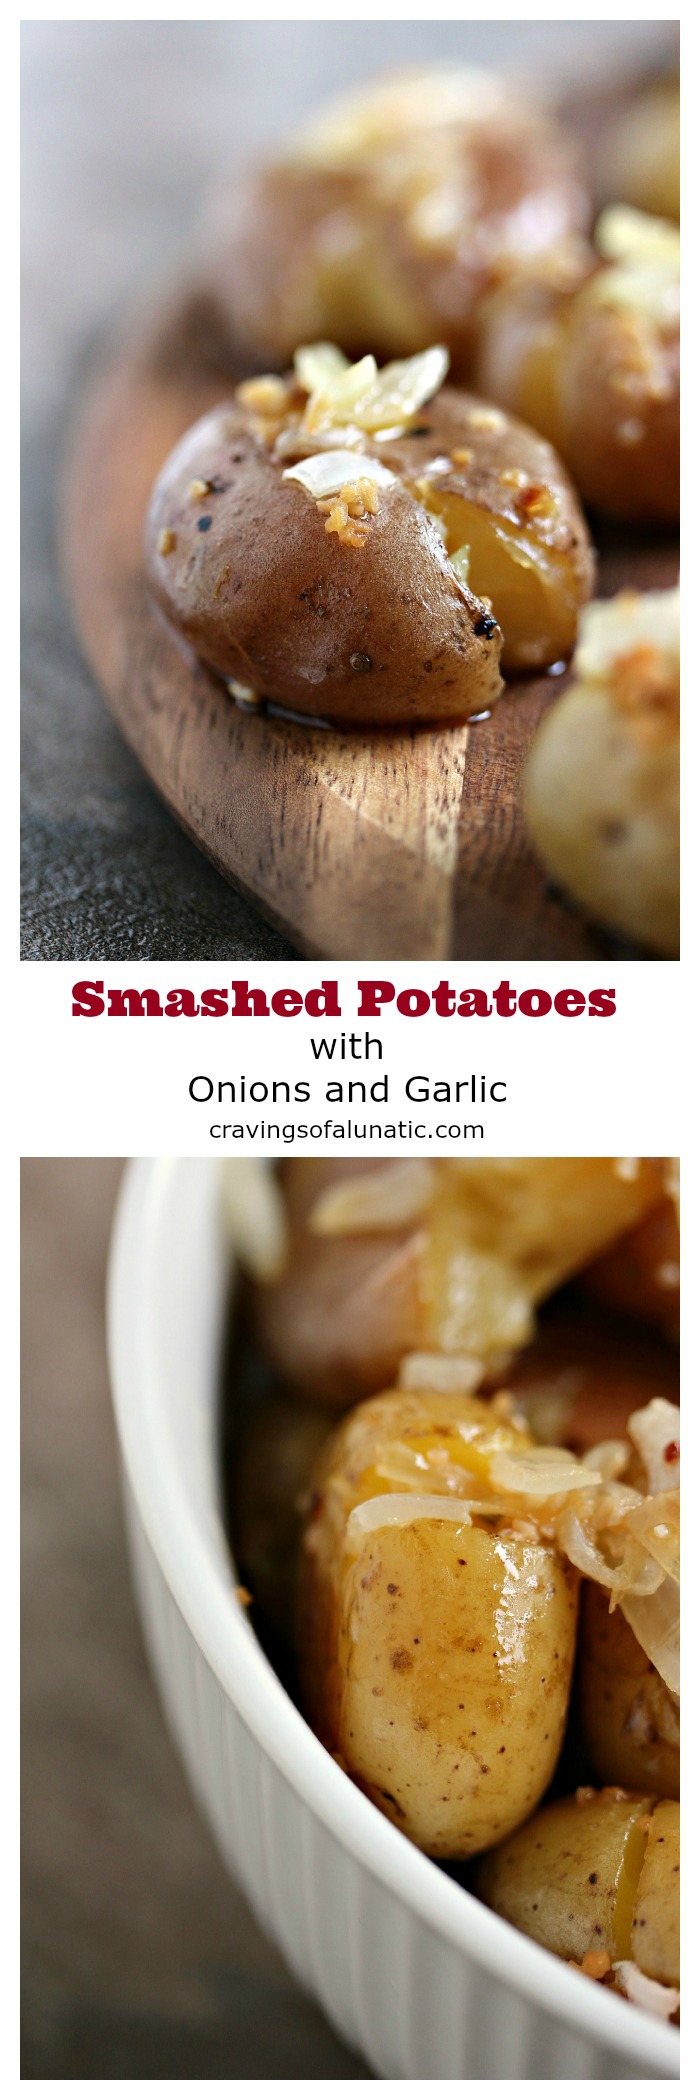 Smashed Potatoes with Onions and Garlic from cravingsofalunatic.com- There is nothing better than Smashed Potatoes for a fabulous side dish at any dinner. This variation used onions and garlic for added flavour. This recipe is going to knock your socks off! (@CravingsLunatic)